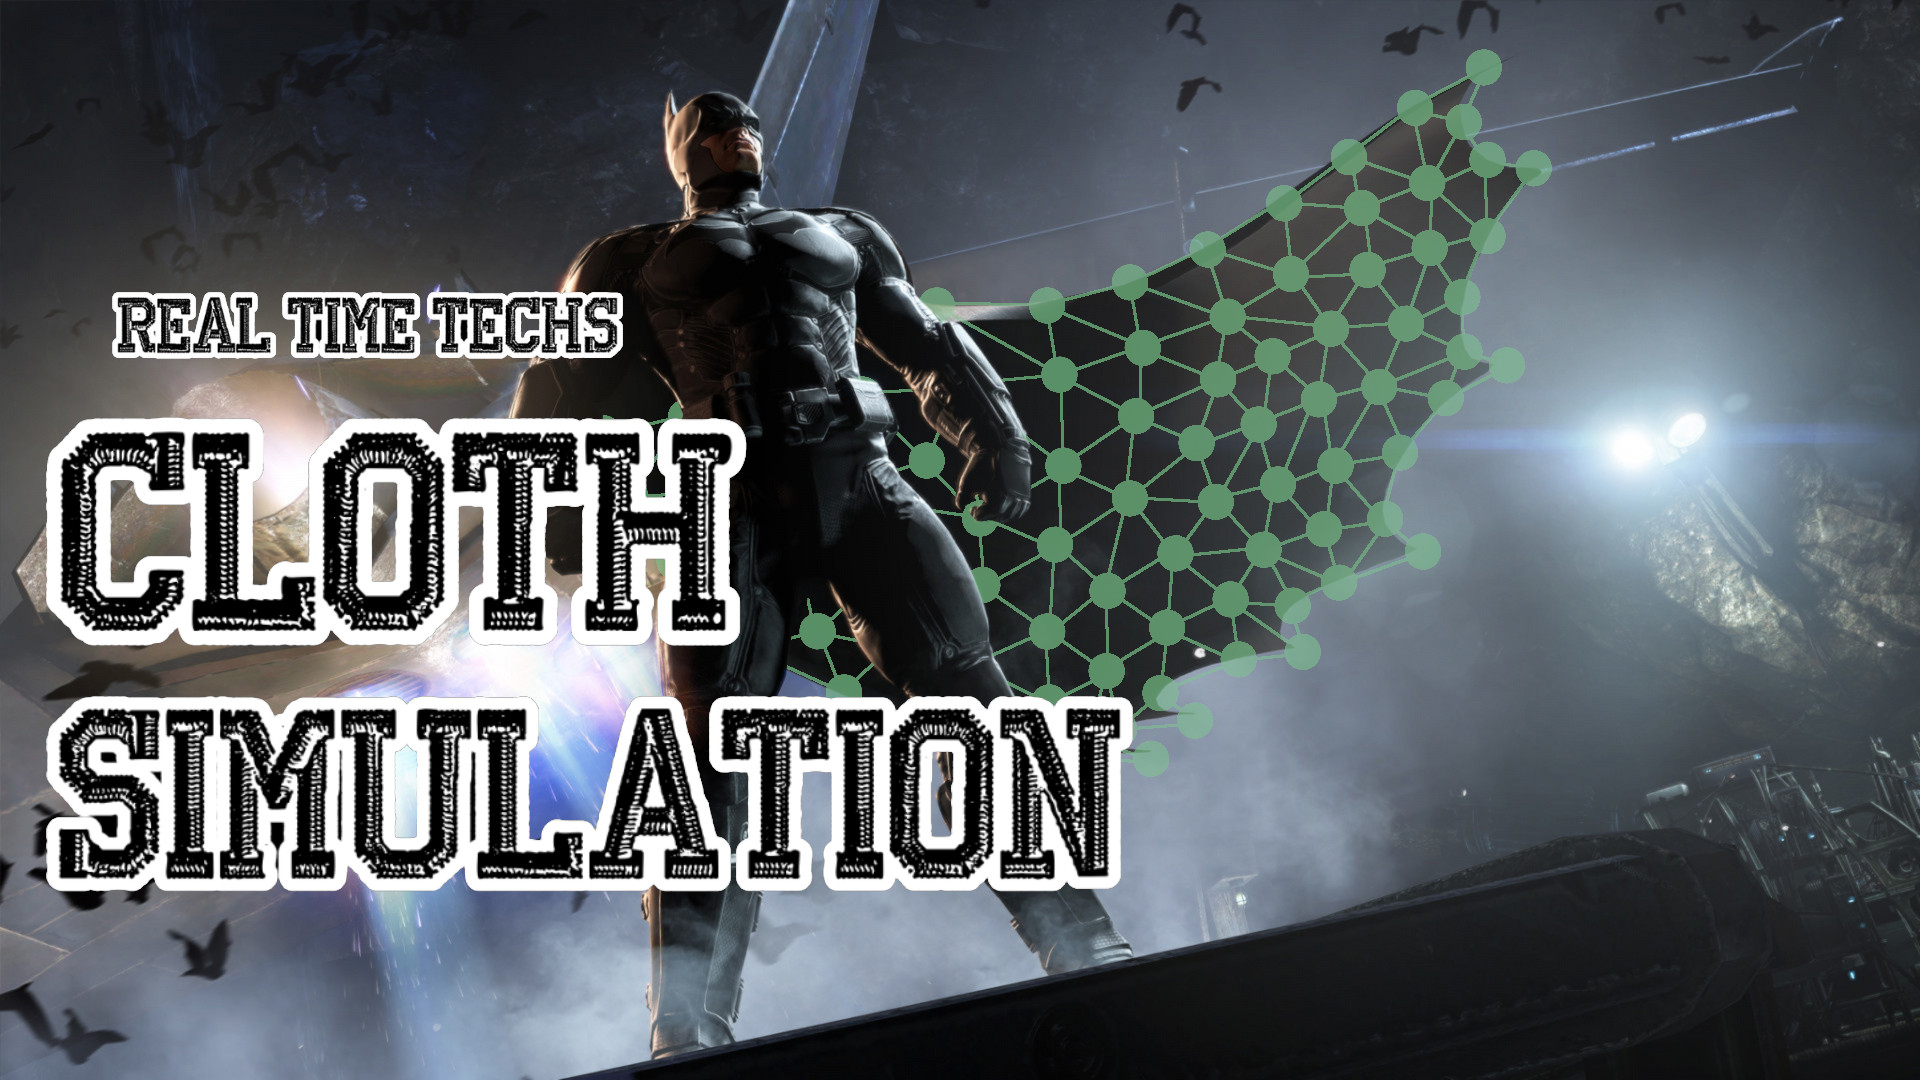 Cloth simulation – Real-Time Techs #1